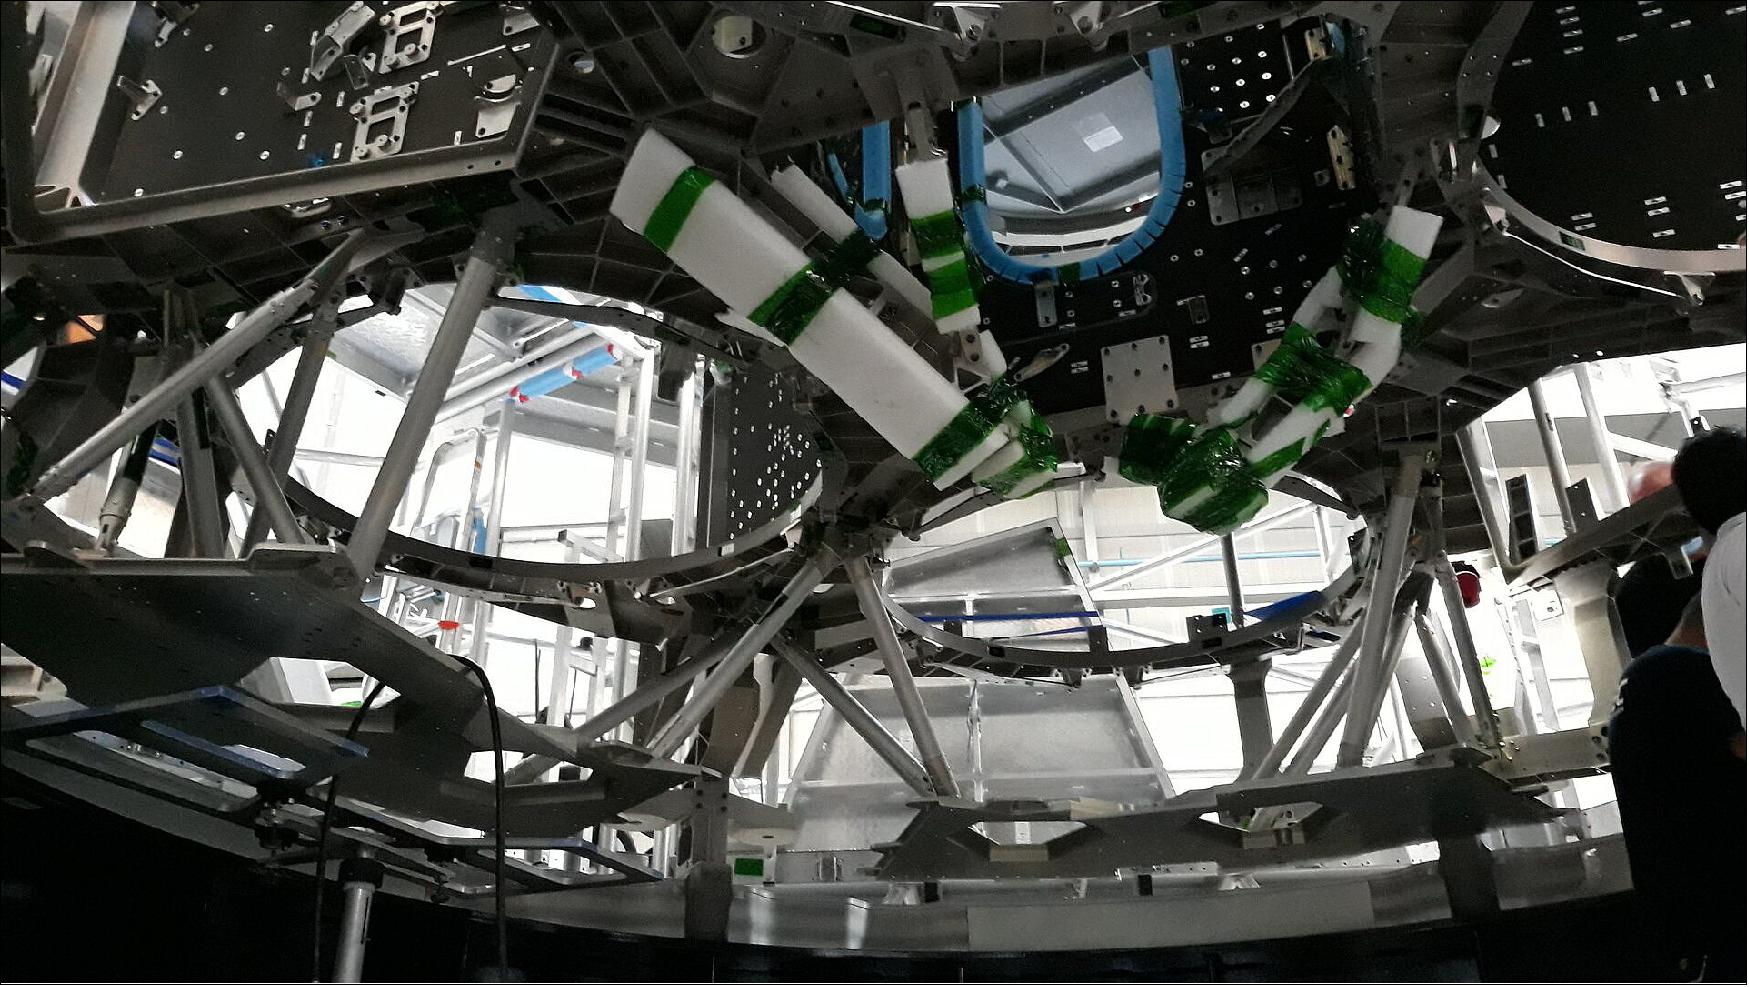 Figure 35: Built in Turin, Italy, at Thales Alenia Space, this is the third such structure to roll out of production. However, this one is extra special, as it will fly the first woman and next man to land on the Moon and return on the Artemis III mission by 2024 (image credit: Thales Alenia Space)